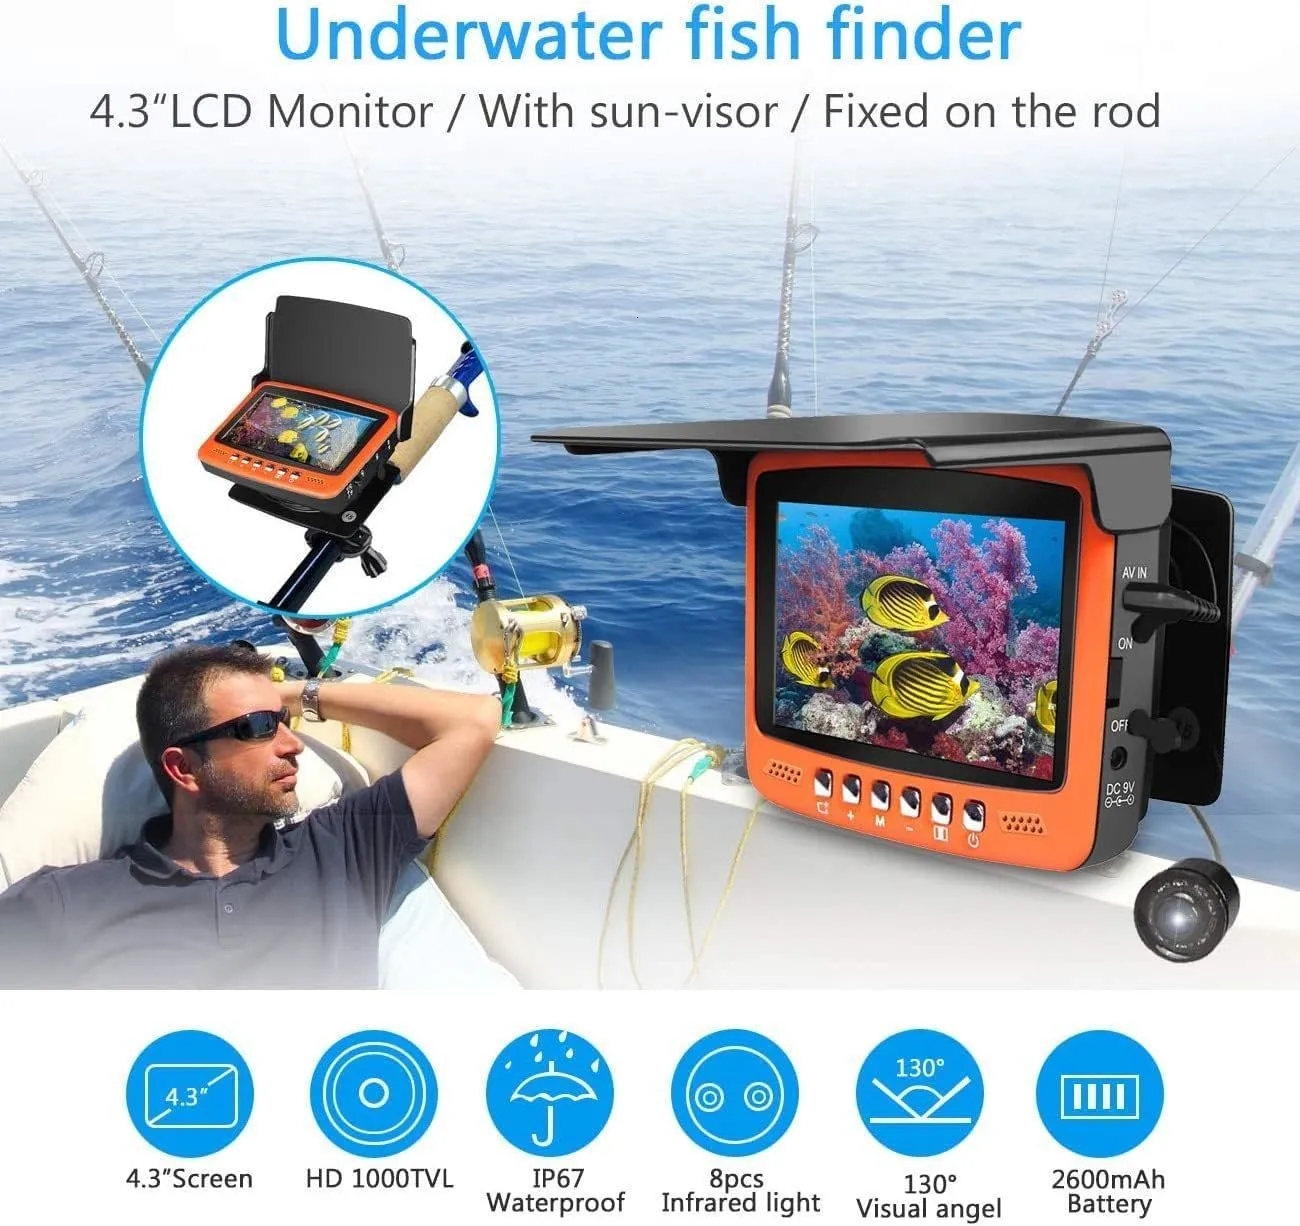 Portable Underwater Fish Finder With 43 IPS Monitor, HD 1000 TVL Waterproof  Camera, 15m Cable, Infrared LED Ideal For Ice Fishing Model: 230825 From  Shu09, $123.78